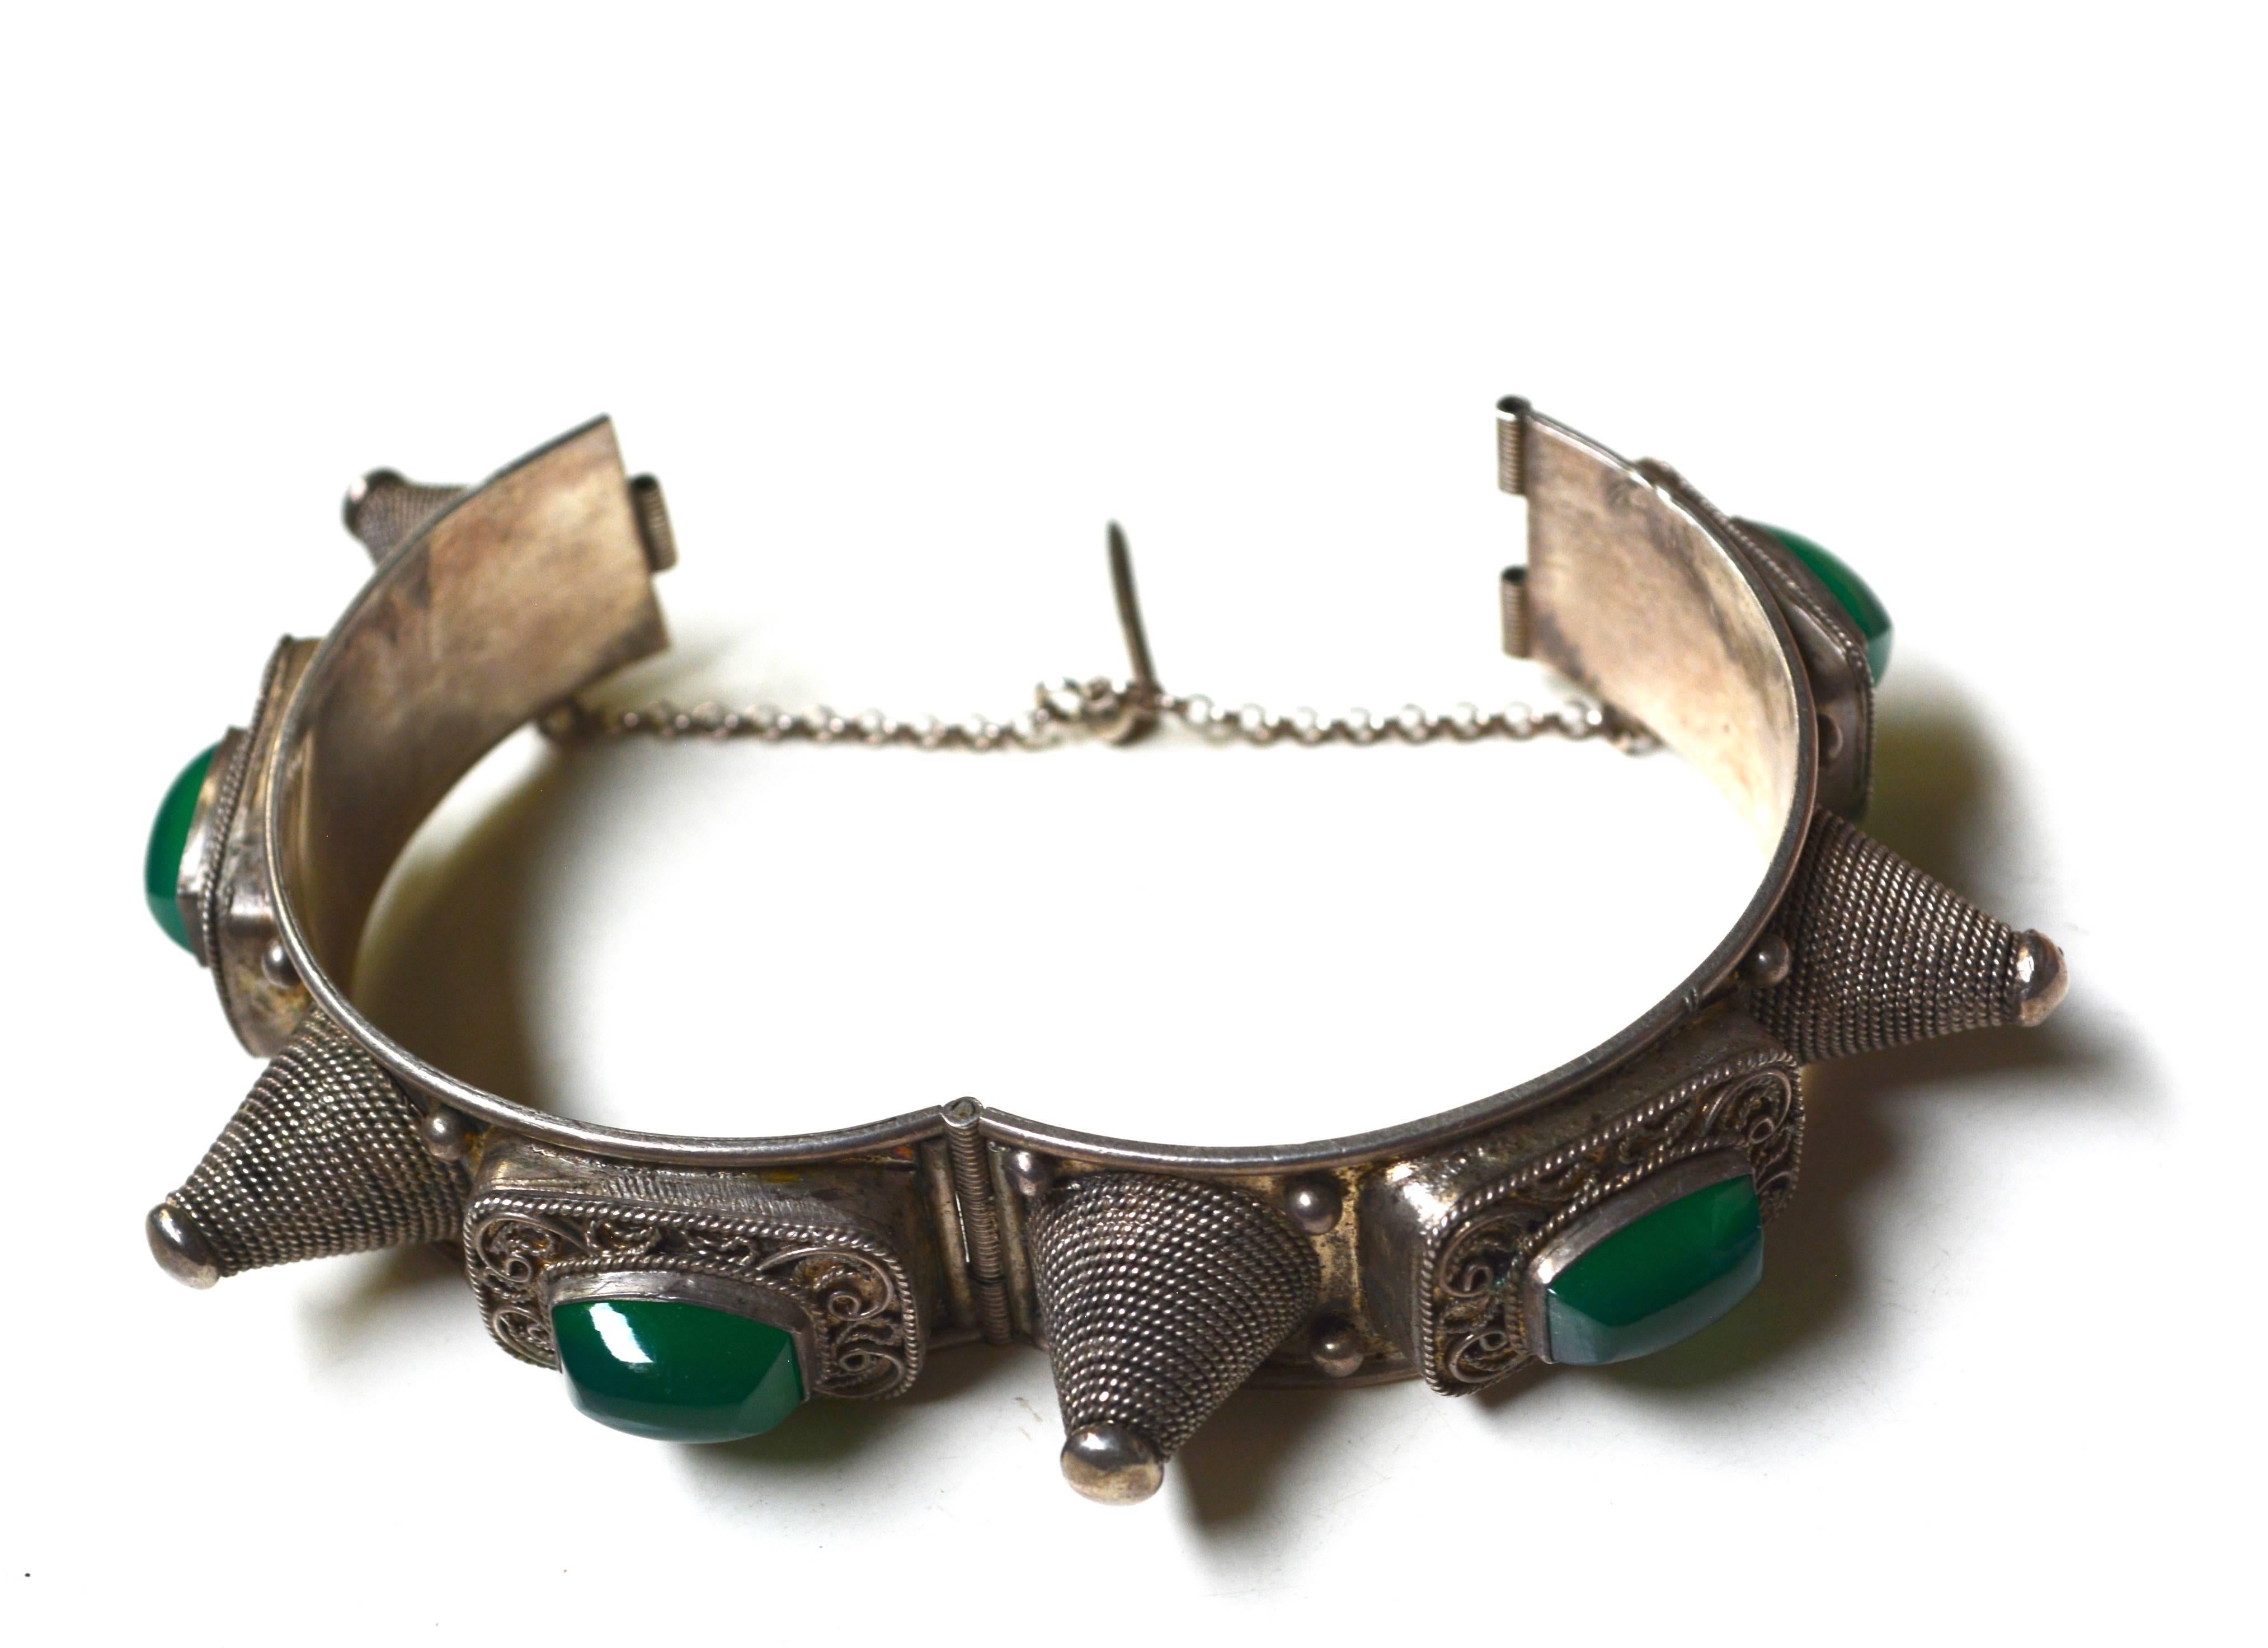  Older 800 silver hand crafted chrysoprase spike bracelet, unmarked.  I believe it is Turkmen or Berber. Tarnish, stones are in good condition. About .75